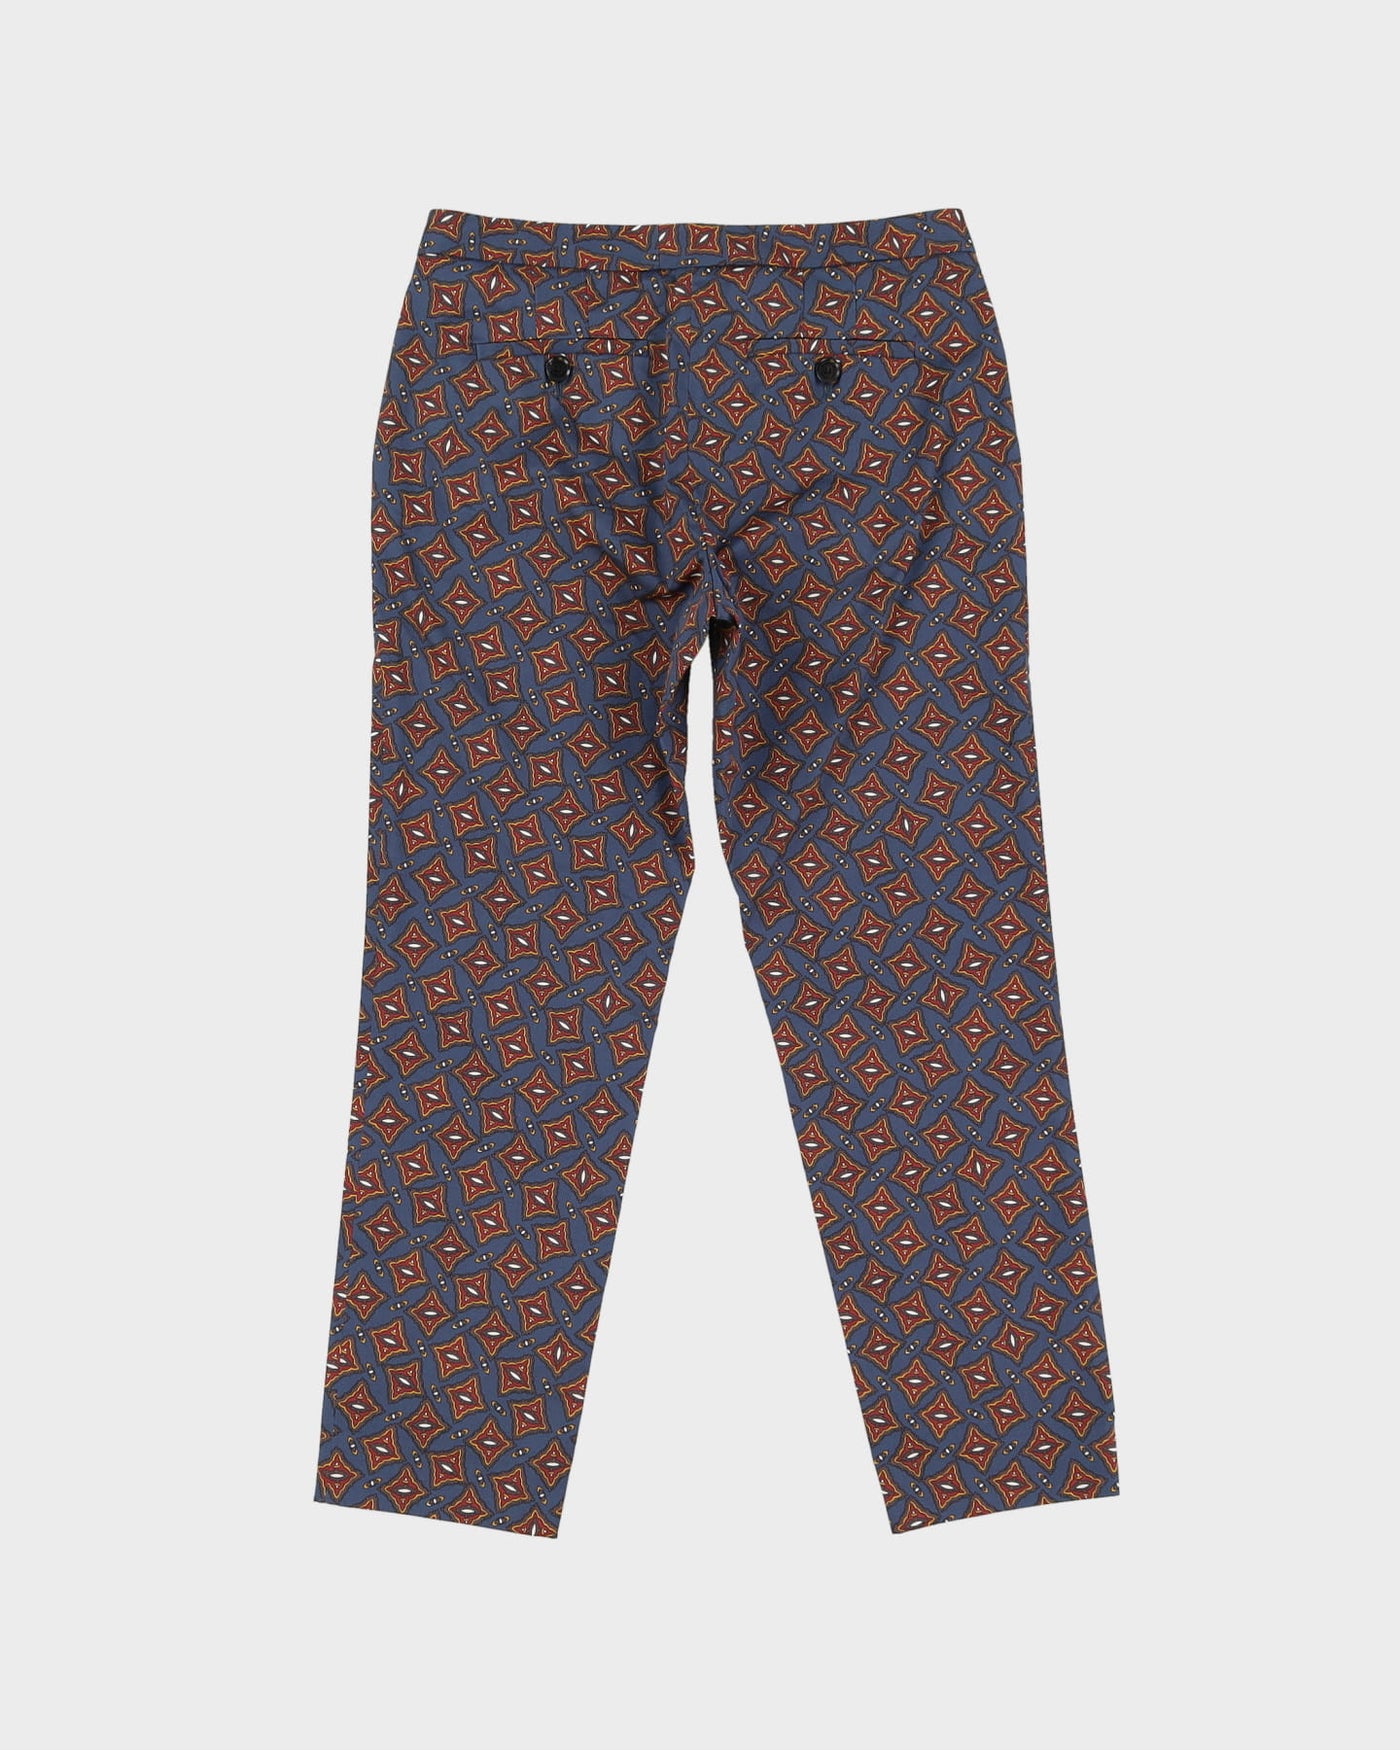 Burberry Blue Patterned Trousers - W28 L26